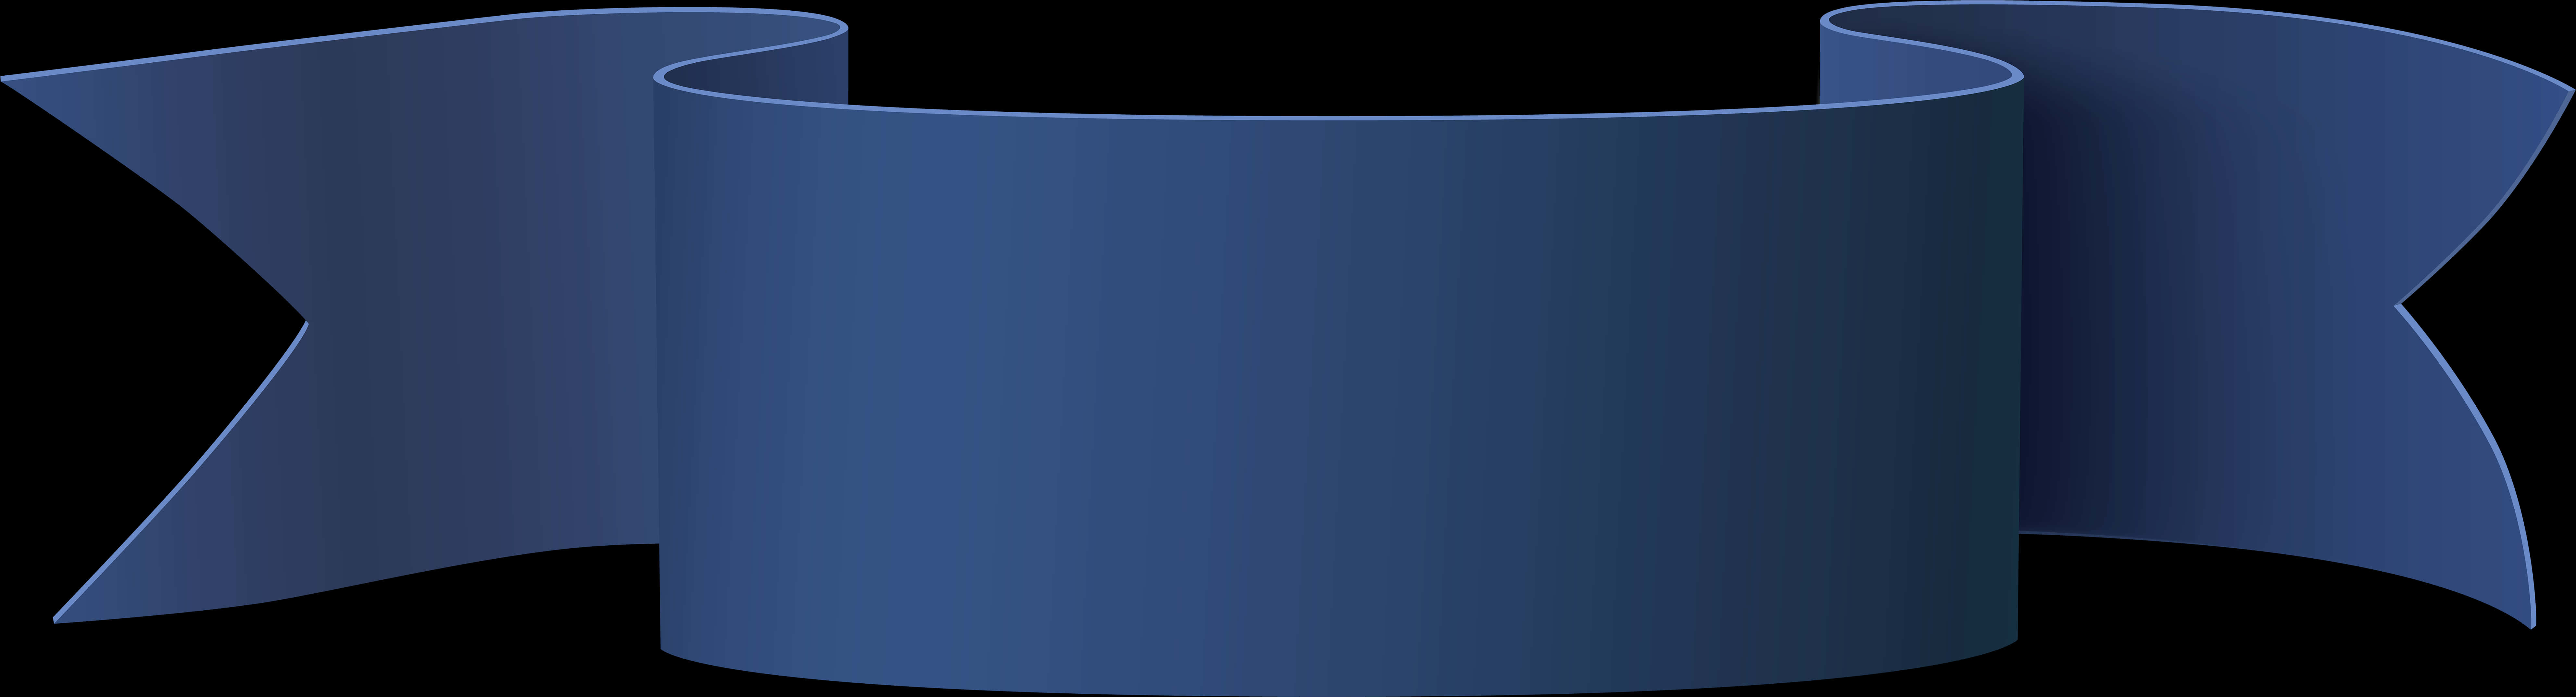 Blue Banner Ribbon Graphic PNG image